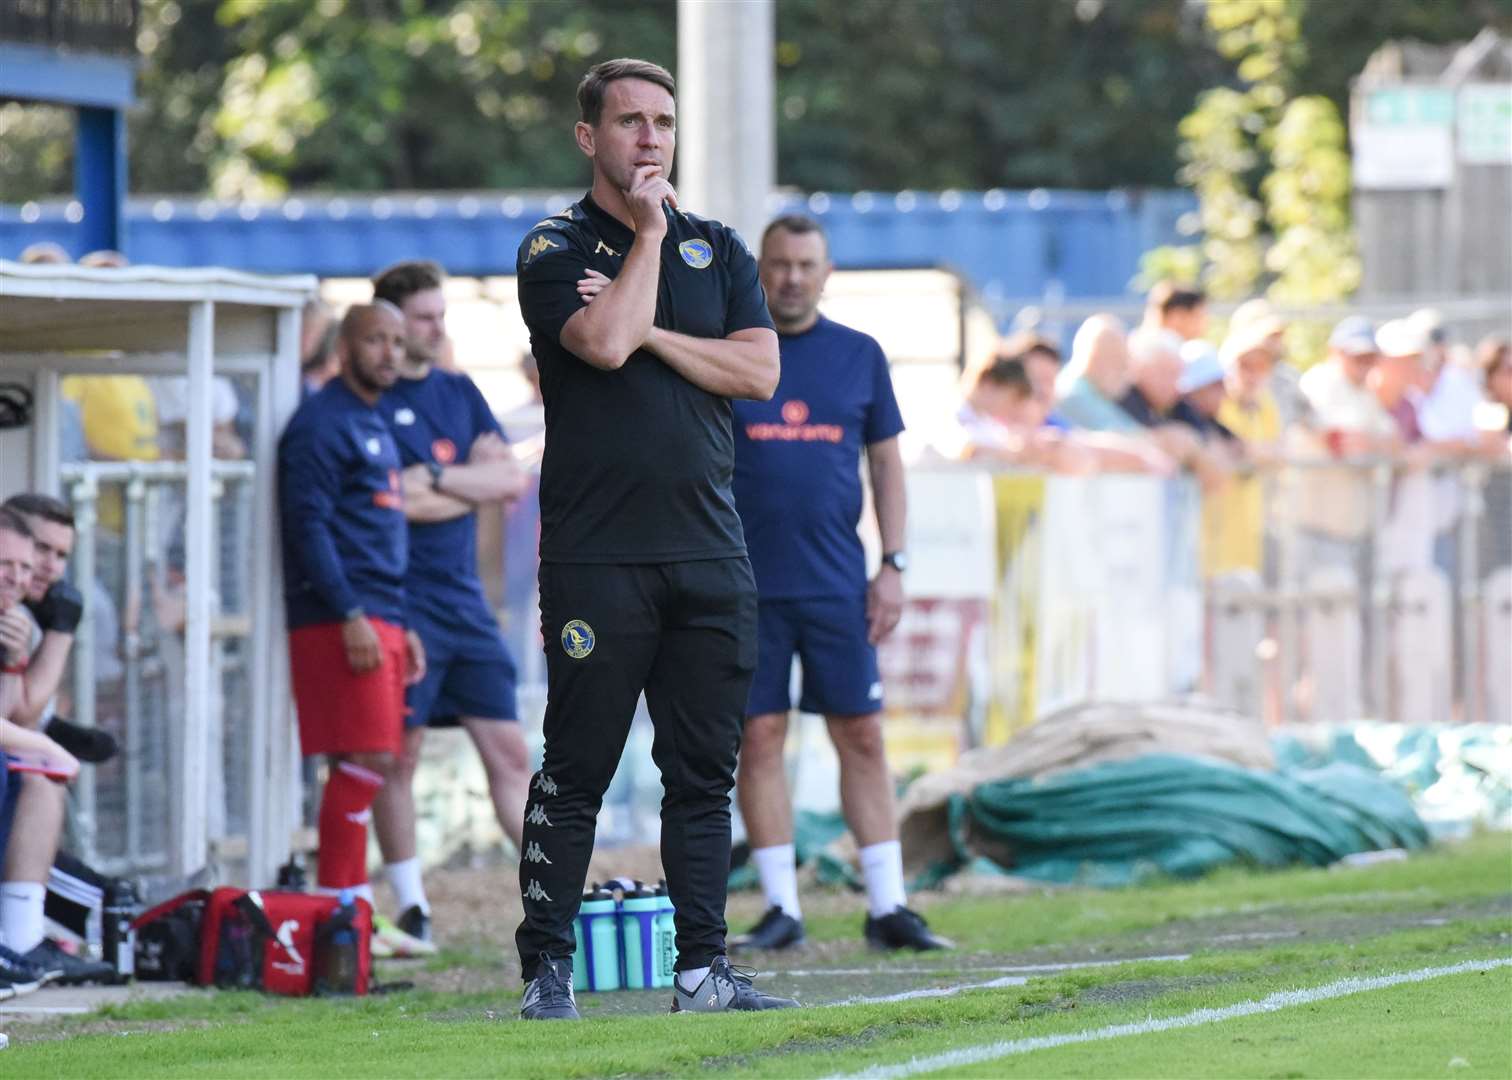 King's Lynn Town suffered an embarrassing exit in their FA Cup replay at Aveley this evening to leave manager Mark Hughes under more pressure.